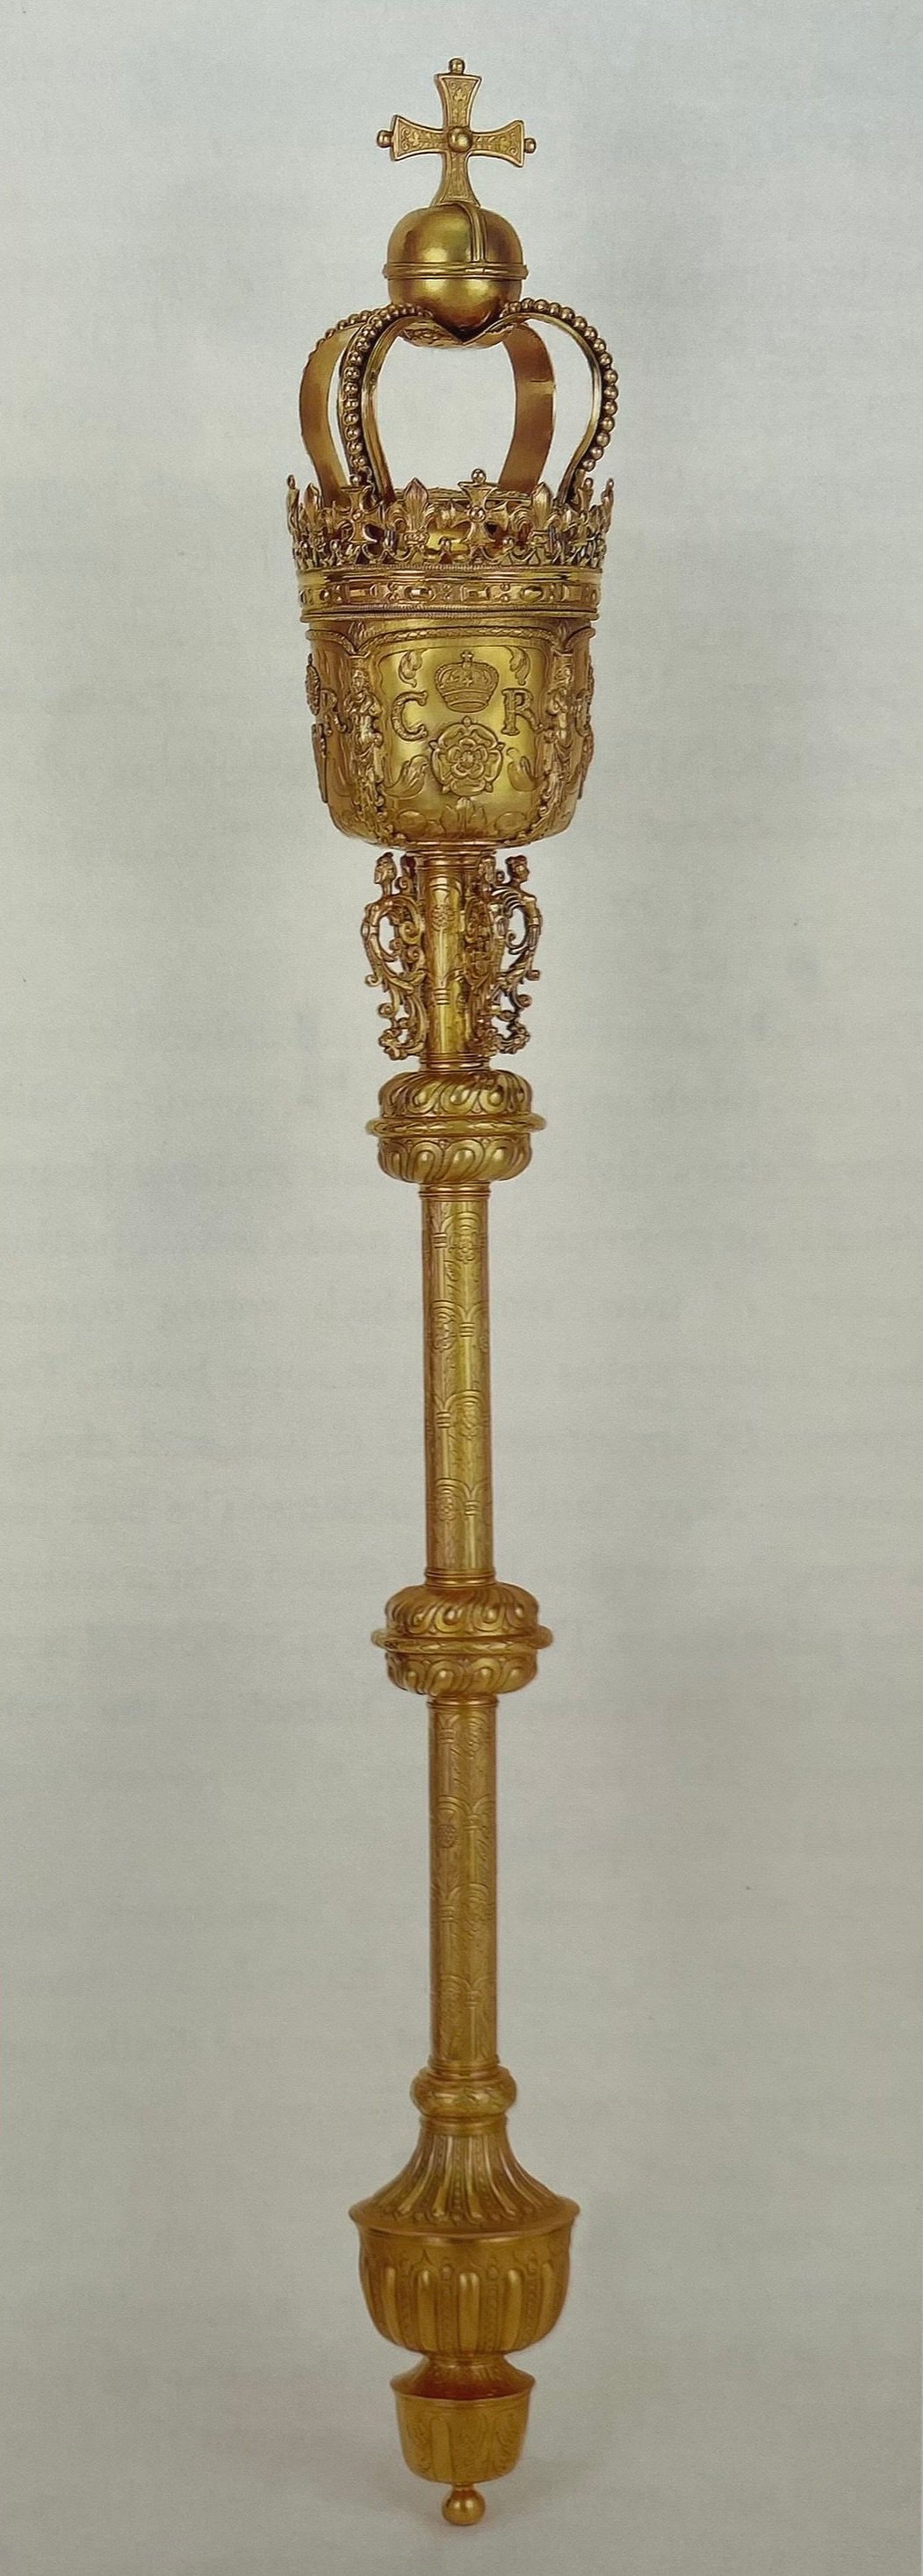 A silver gilt mace of the reign of Charles II